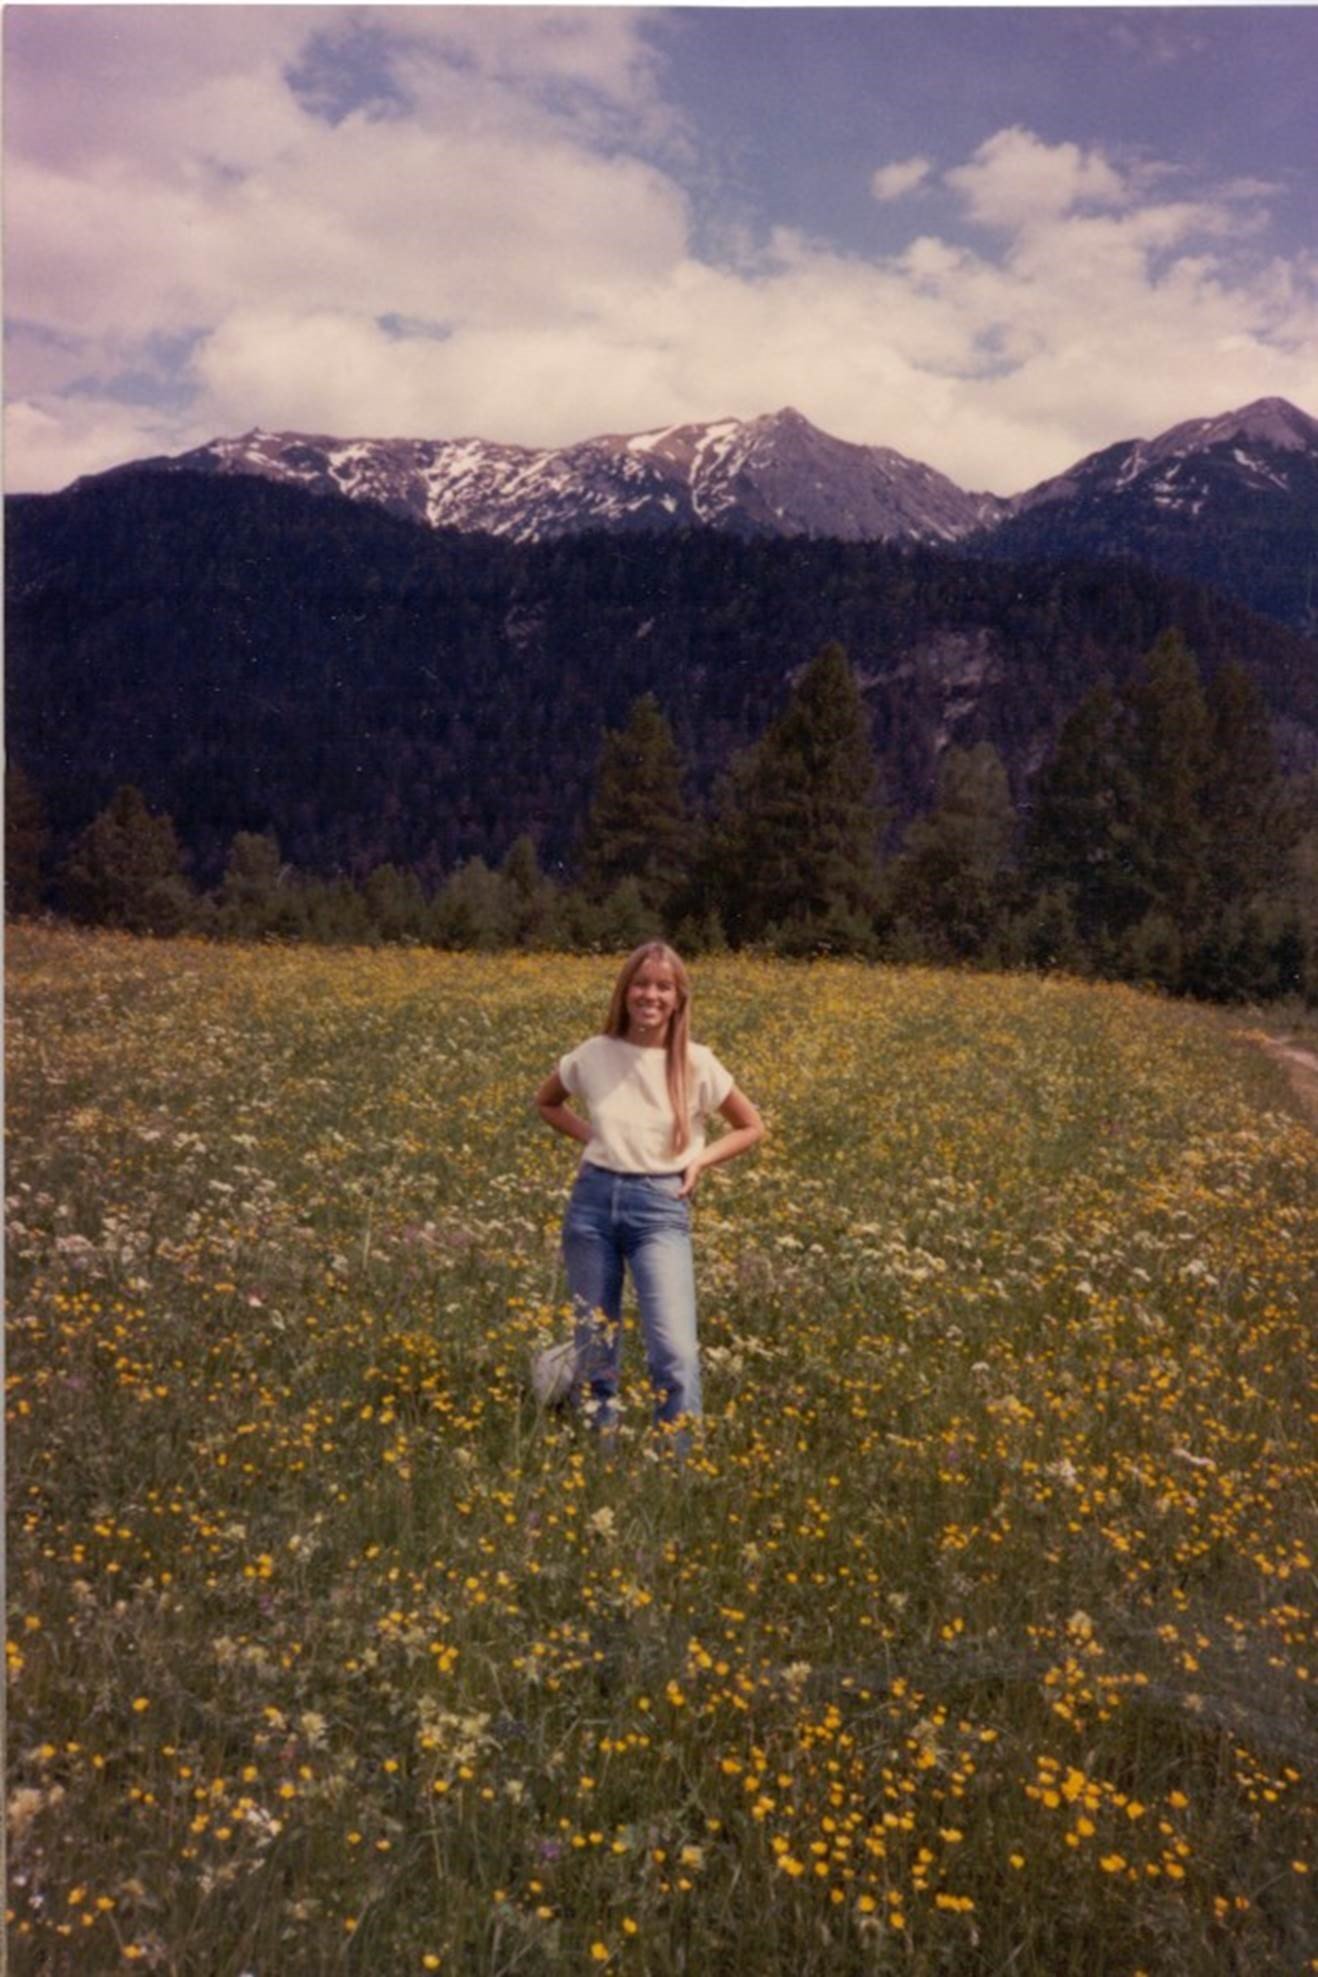 Dianna Milewicz, MD, PhD, during a celebratory trip to the Alps after graduating from medical school. (Photo by Dianna Milewicz)